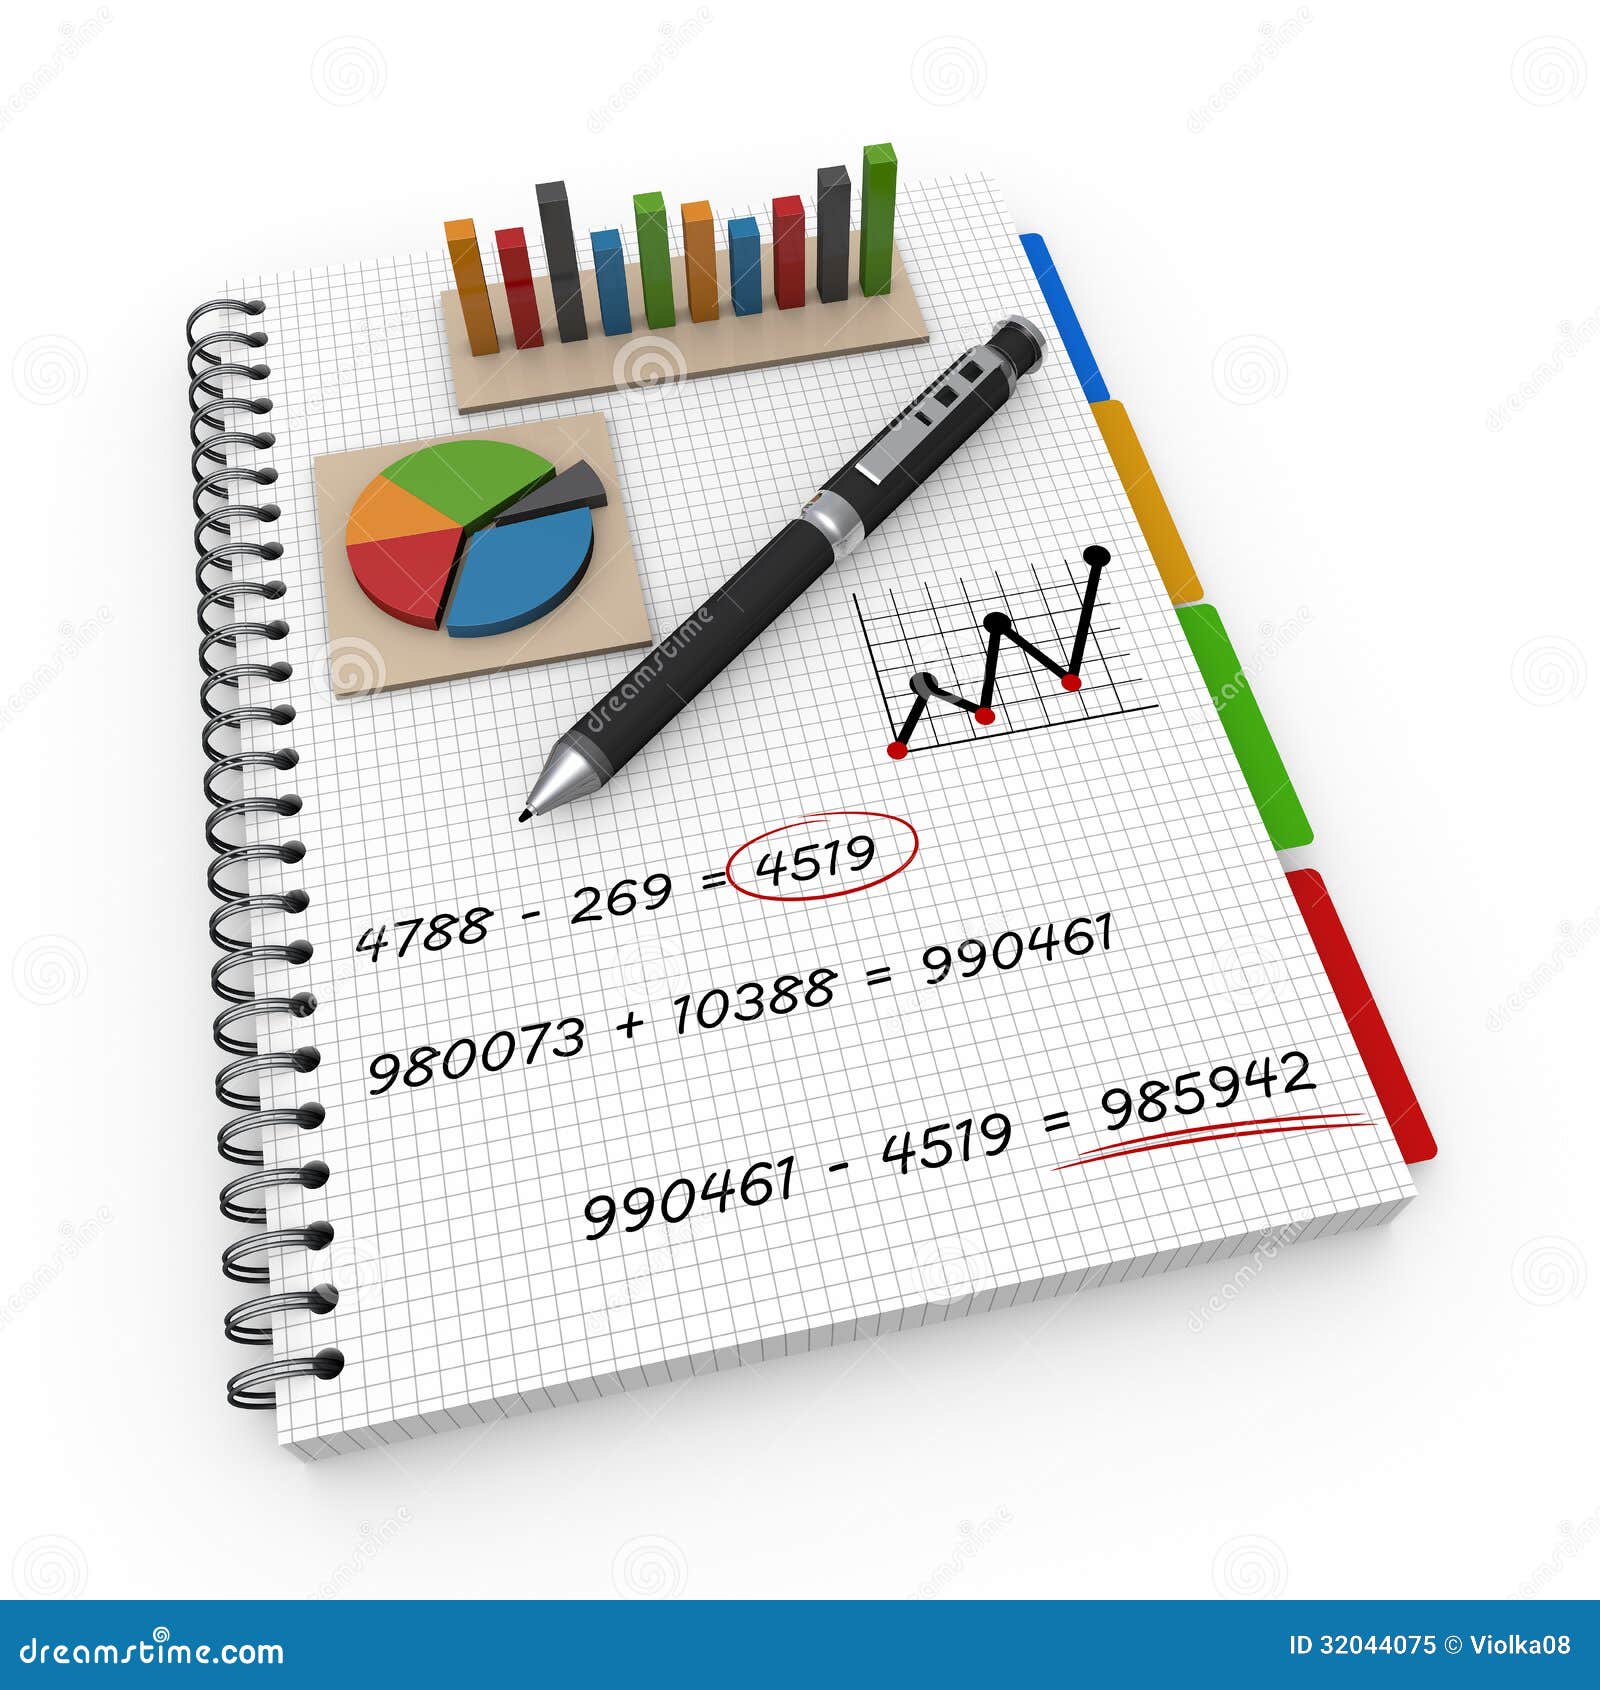 Notebook Accounting Concept Stock Image - Image of finance, accounting:  32044075